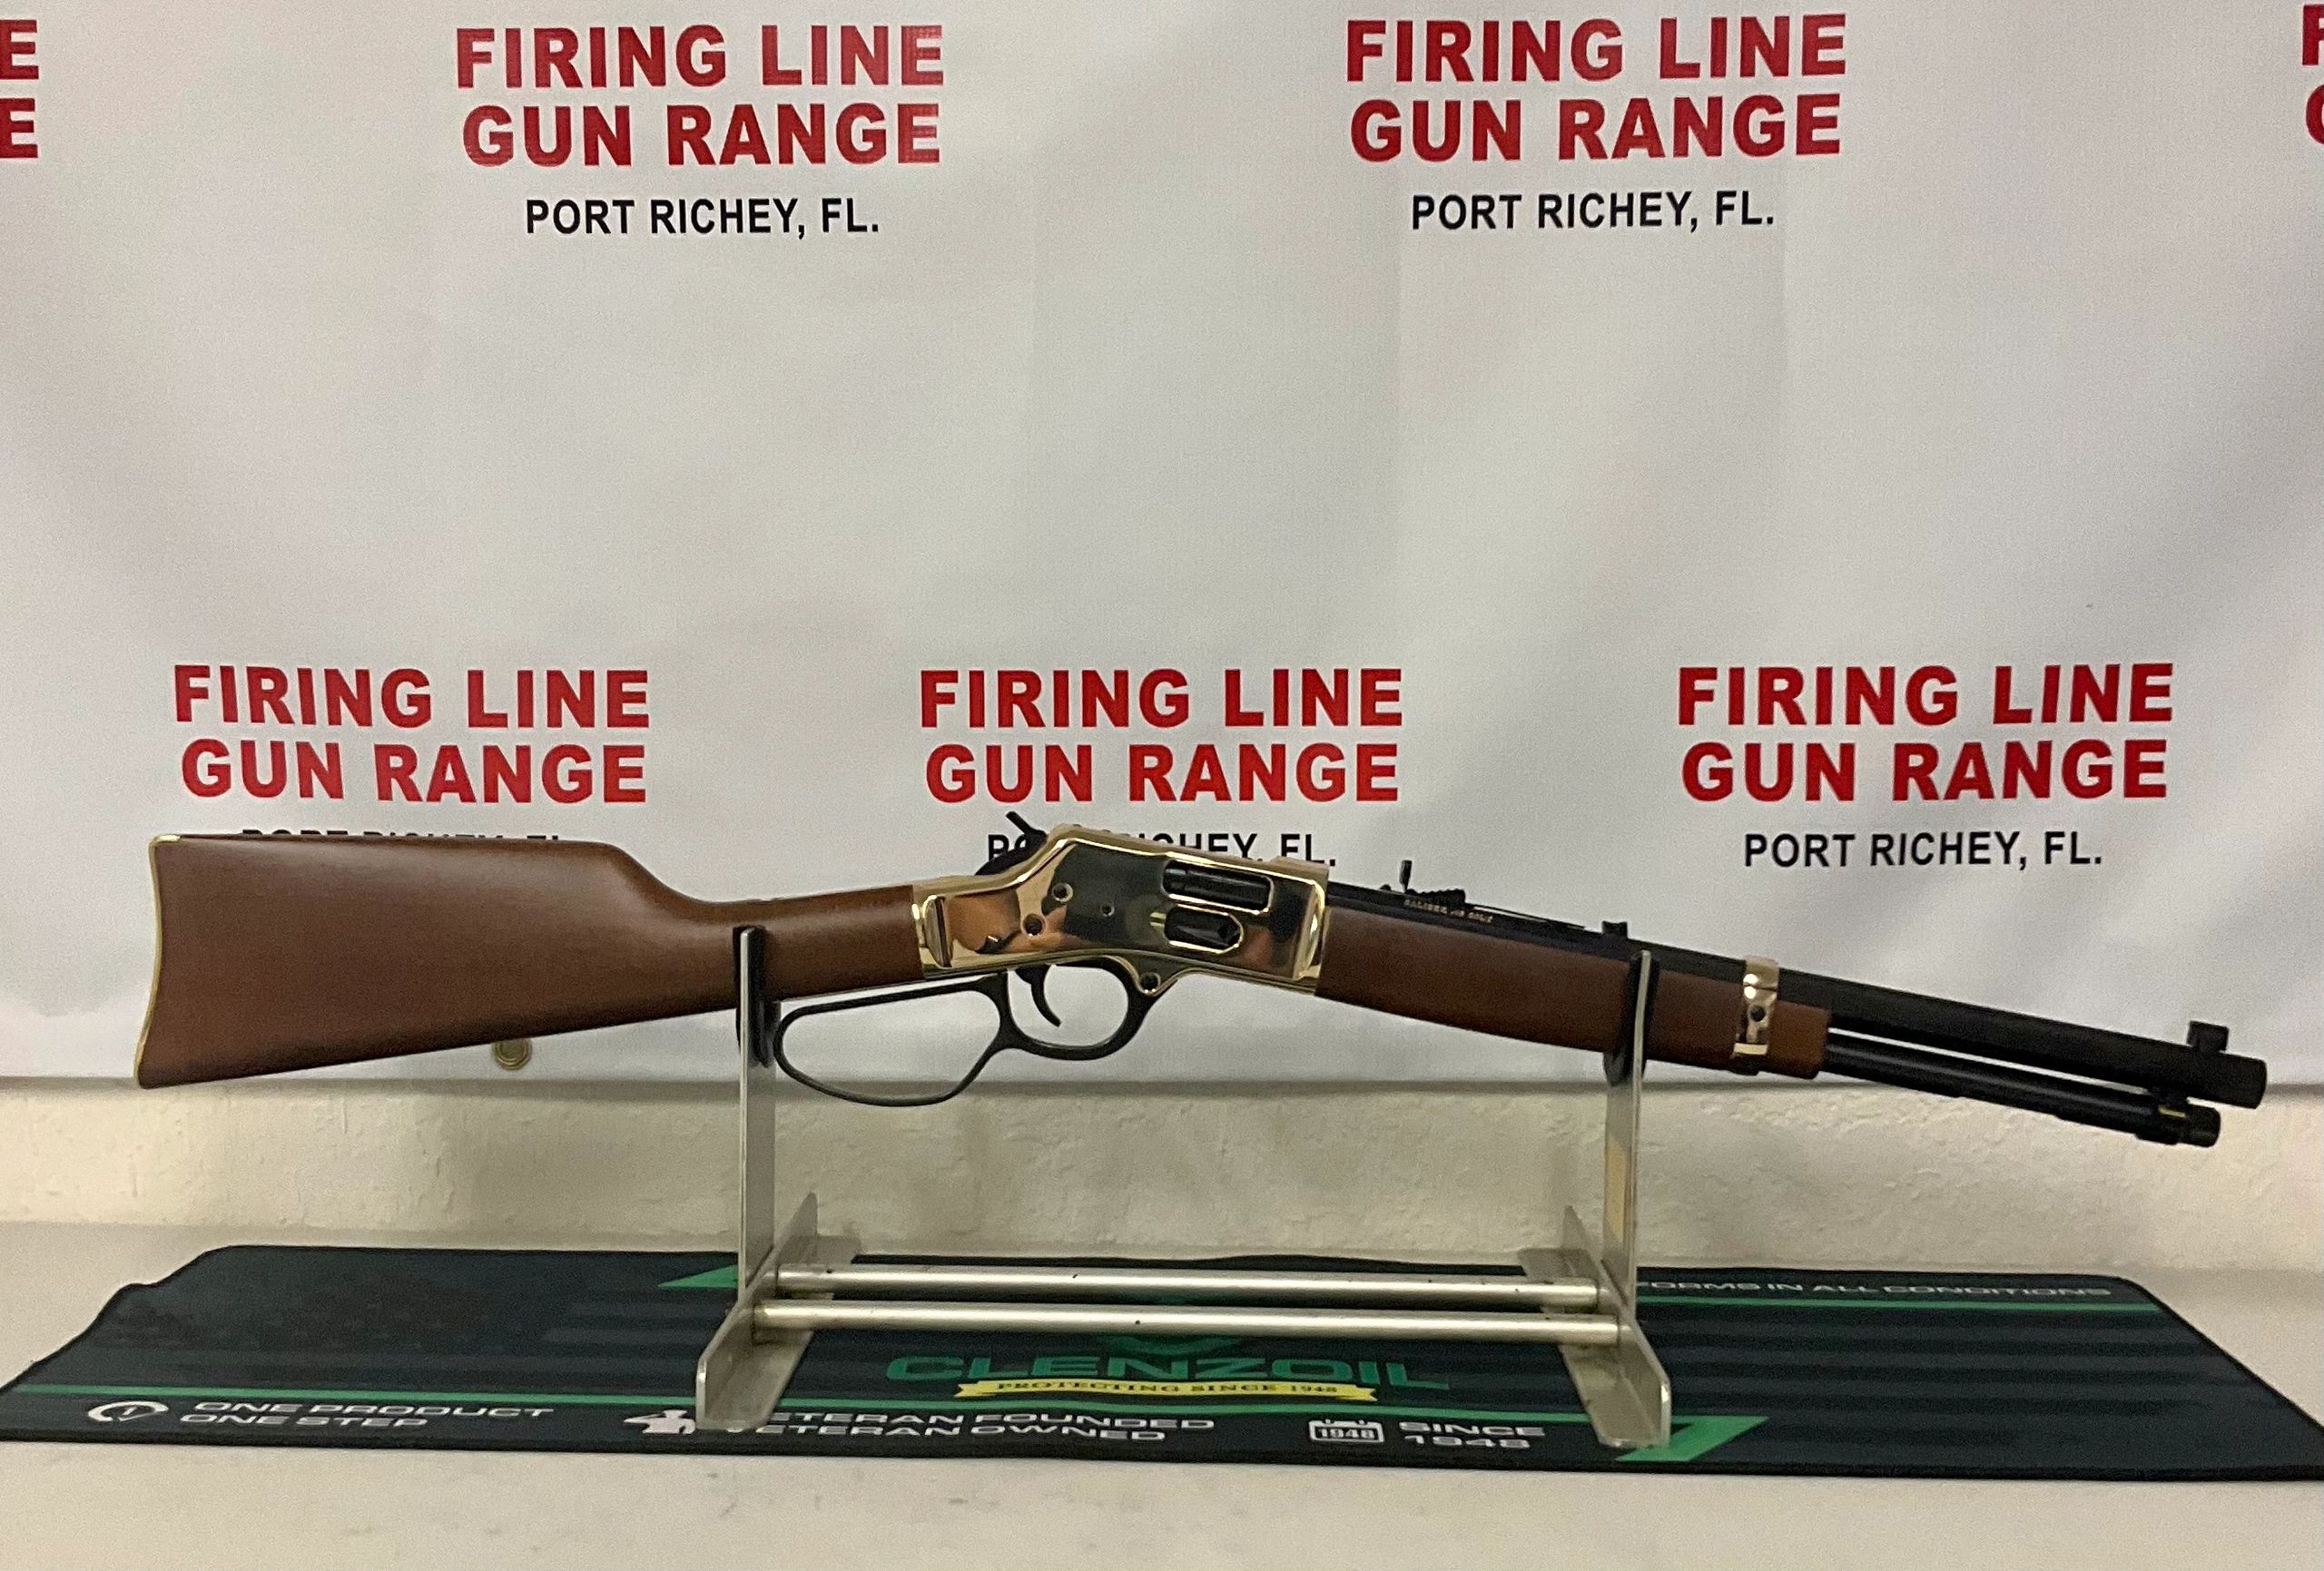 Henry Big Boy 45 Long, Big Loop, 16.5” Barrel, 7 round capacity. $999.99
Stop in or Call for Purchas